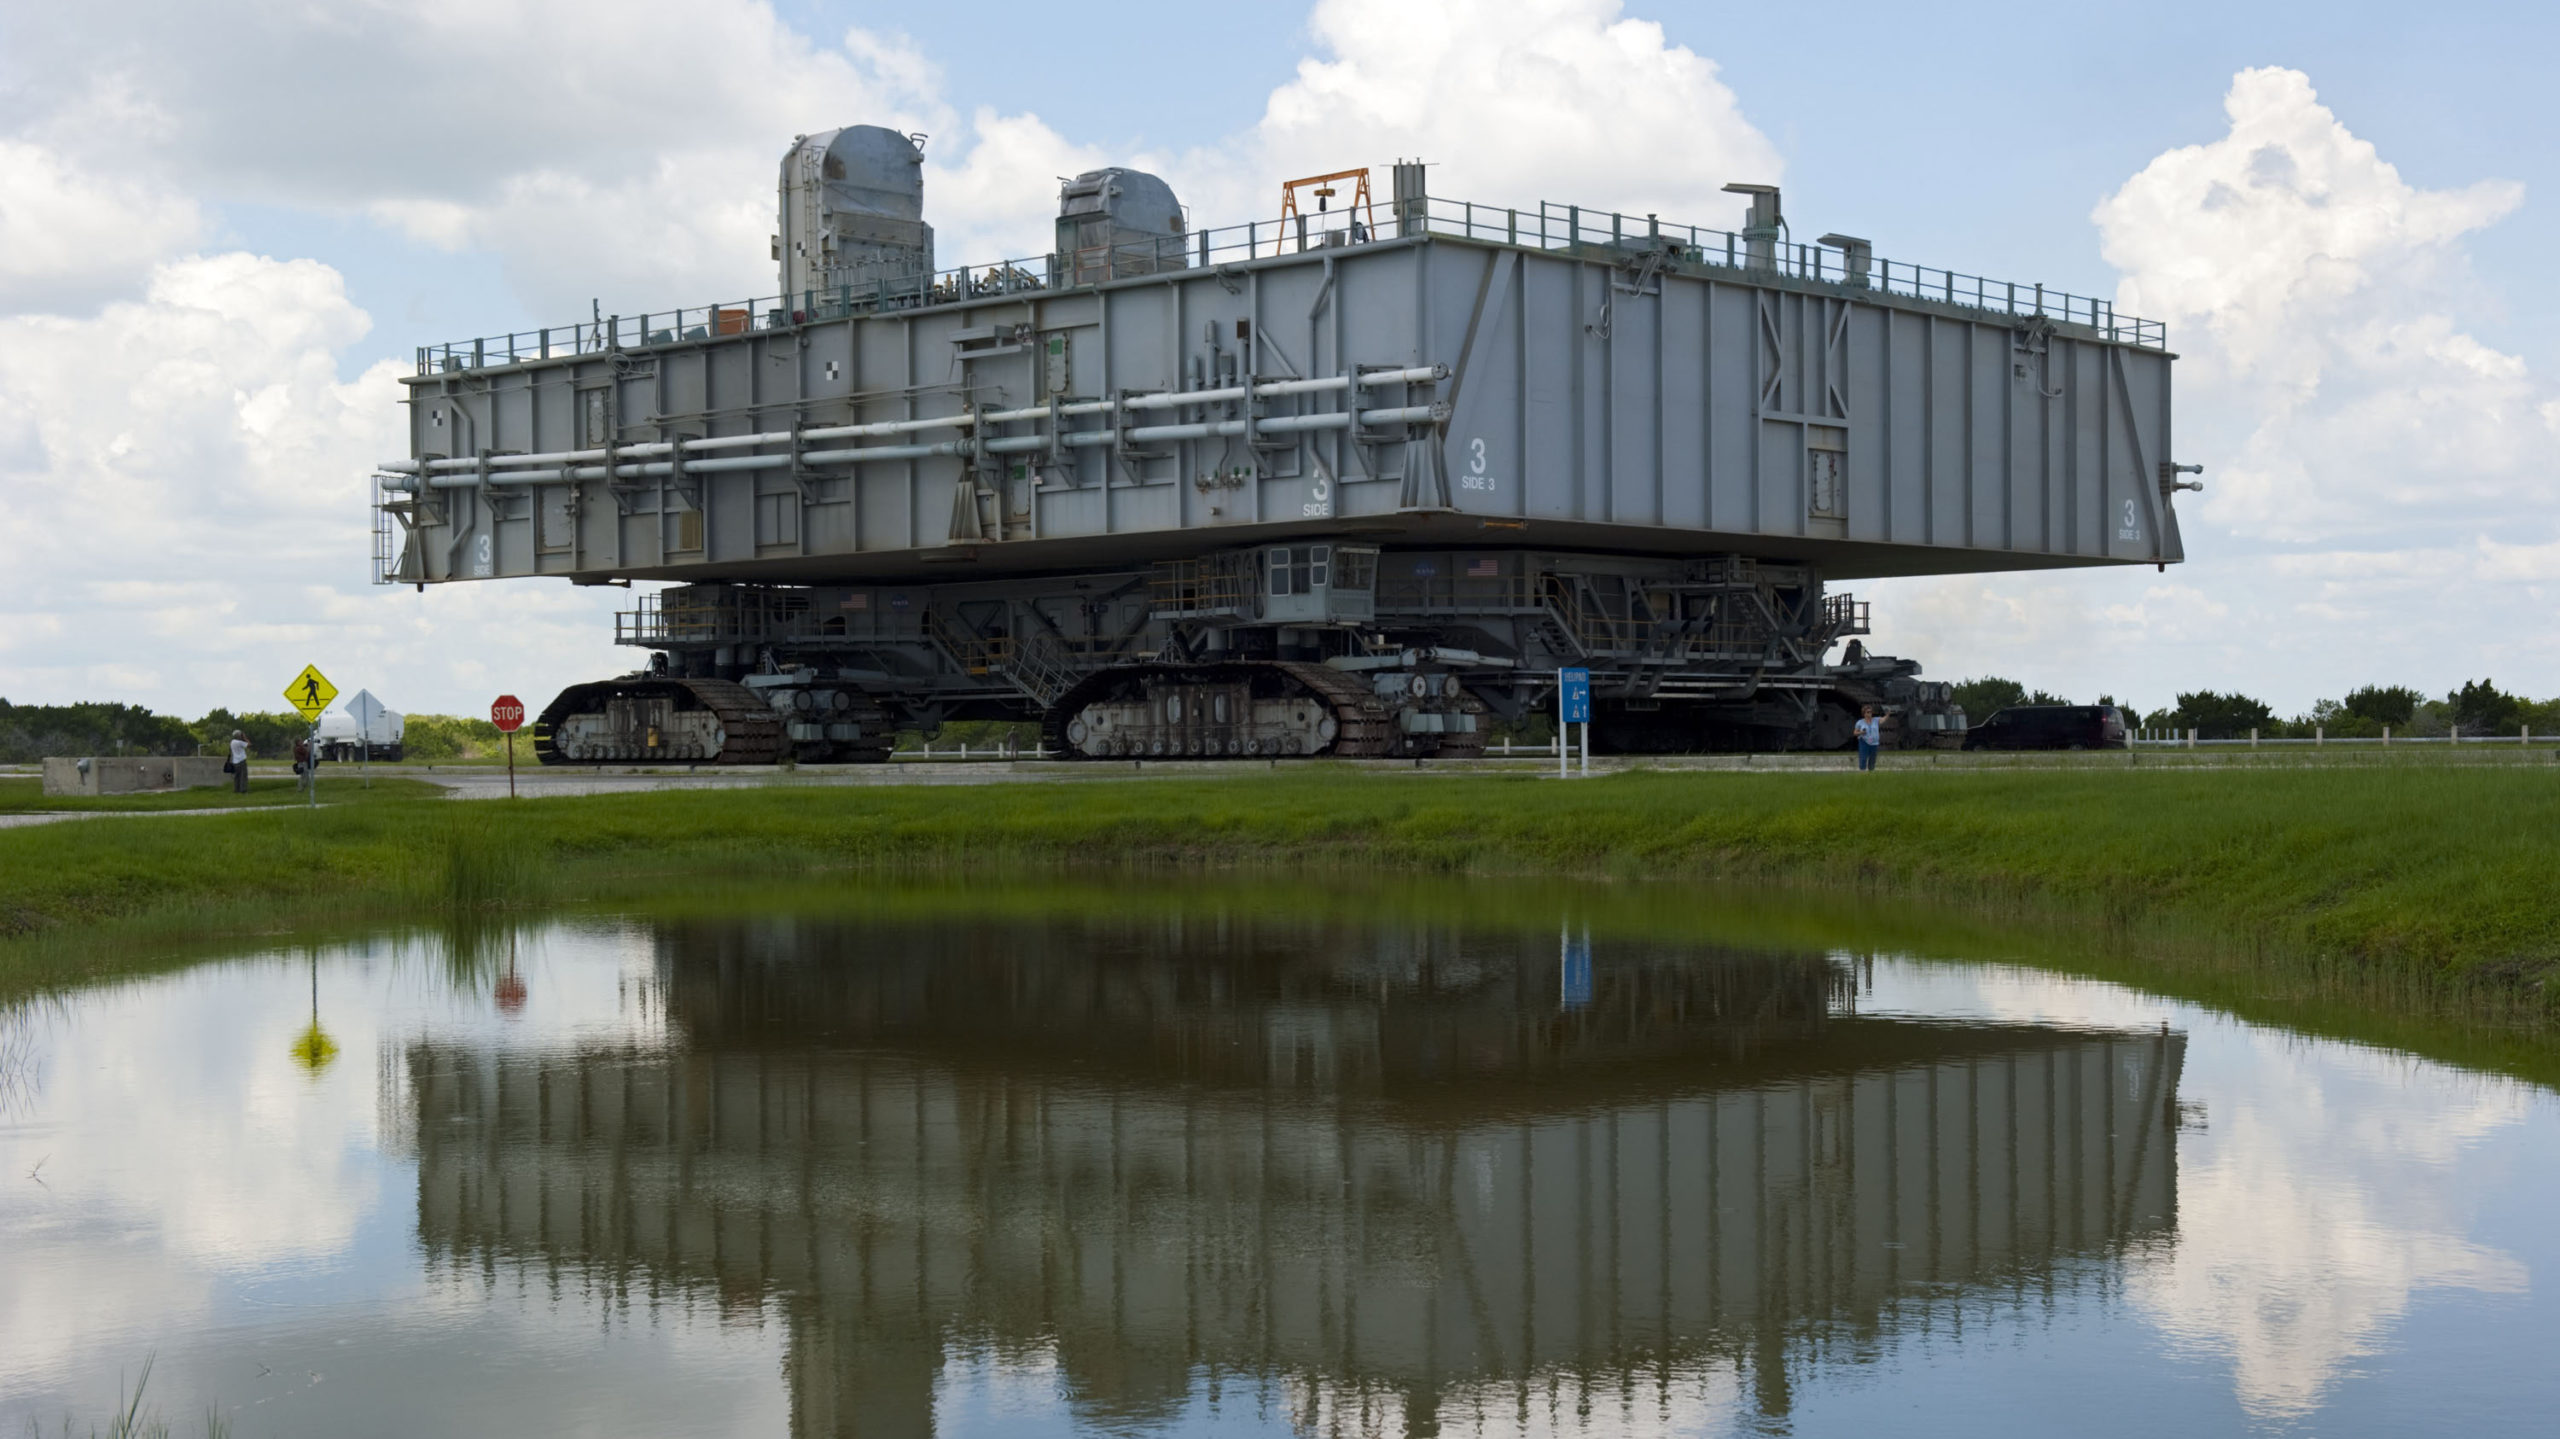 Mobile Launcher Platform-3 as it appeared in 2011.  (Image: NASA)